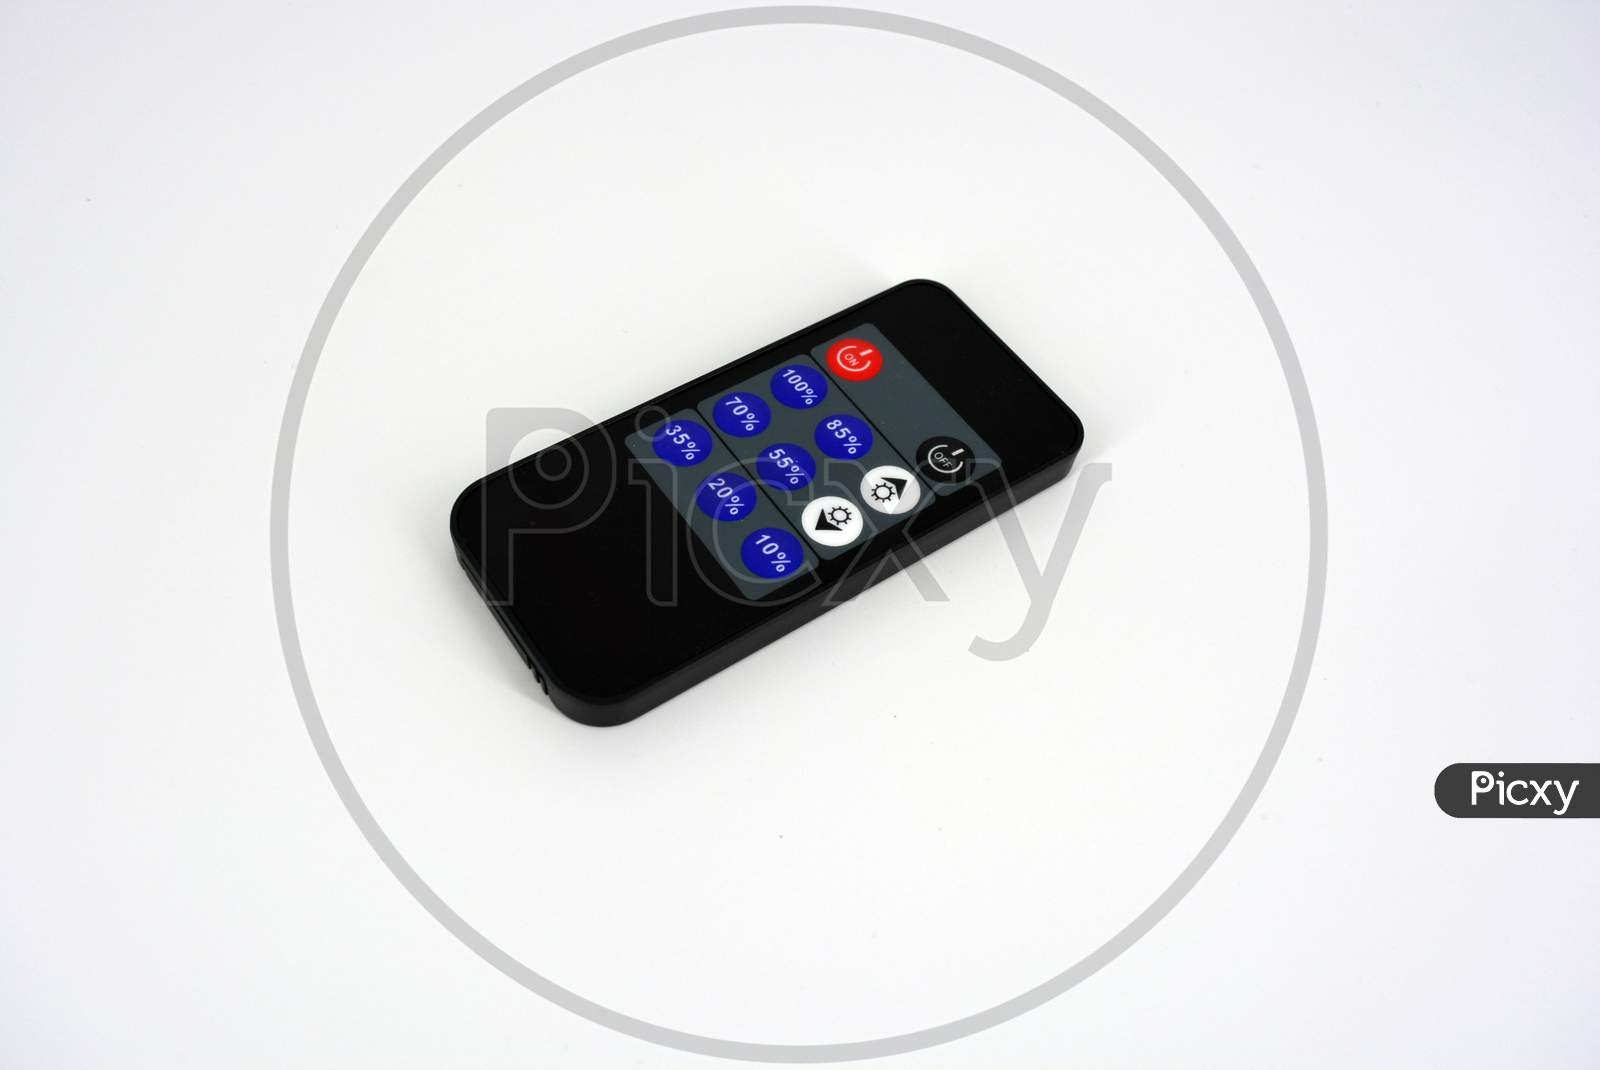 Black plastic radio remote control on batteries with colored buttons located on a white plastic background.